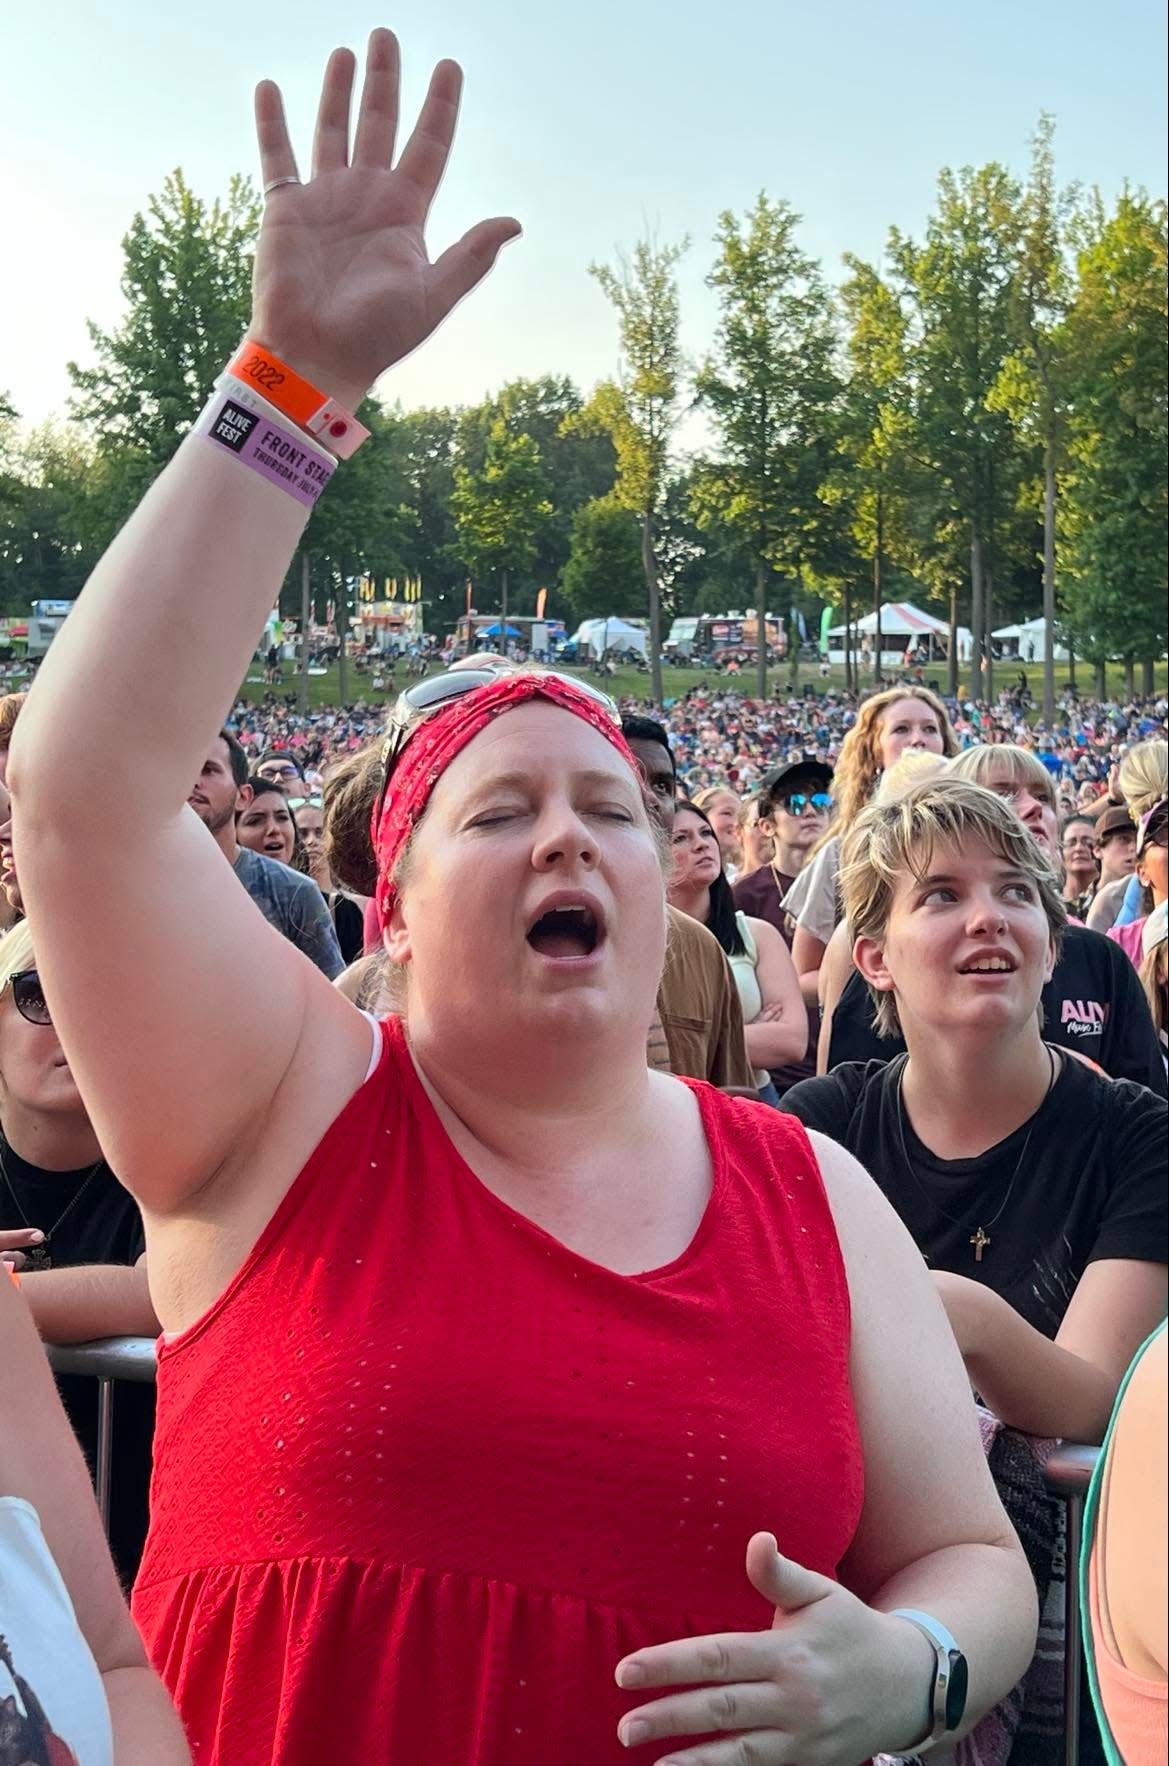 A fan expresses emotion during Danny Gokey's performance at the 2022 Alive Music Festival at Atwood Lake Park. This week's 2023 festival is expected to draw more than 20,000 people.